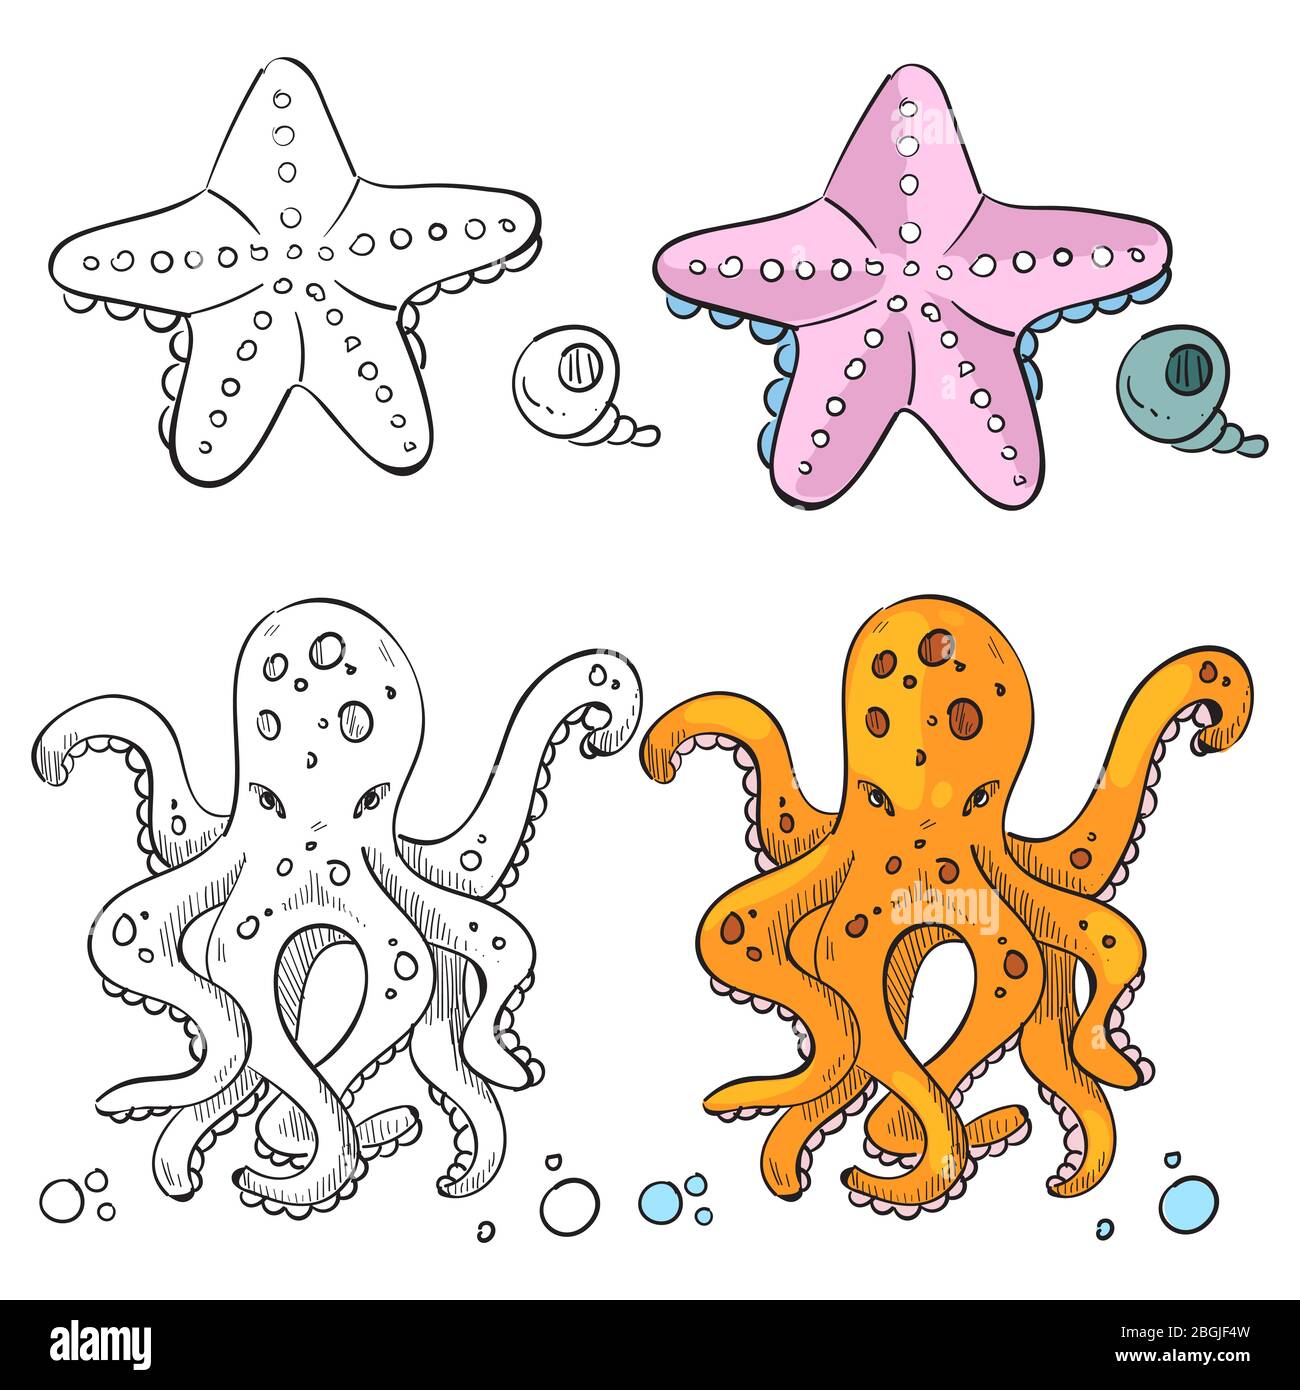 Ocean life coloring page design. Starfish and octopus isolated on white background. Vector illustration Stock Vector